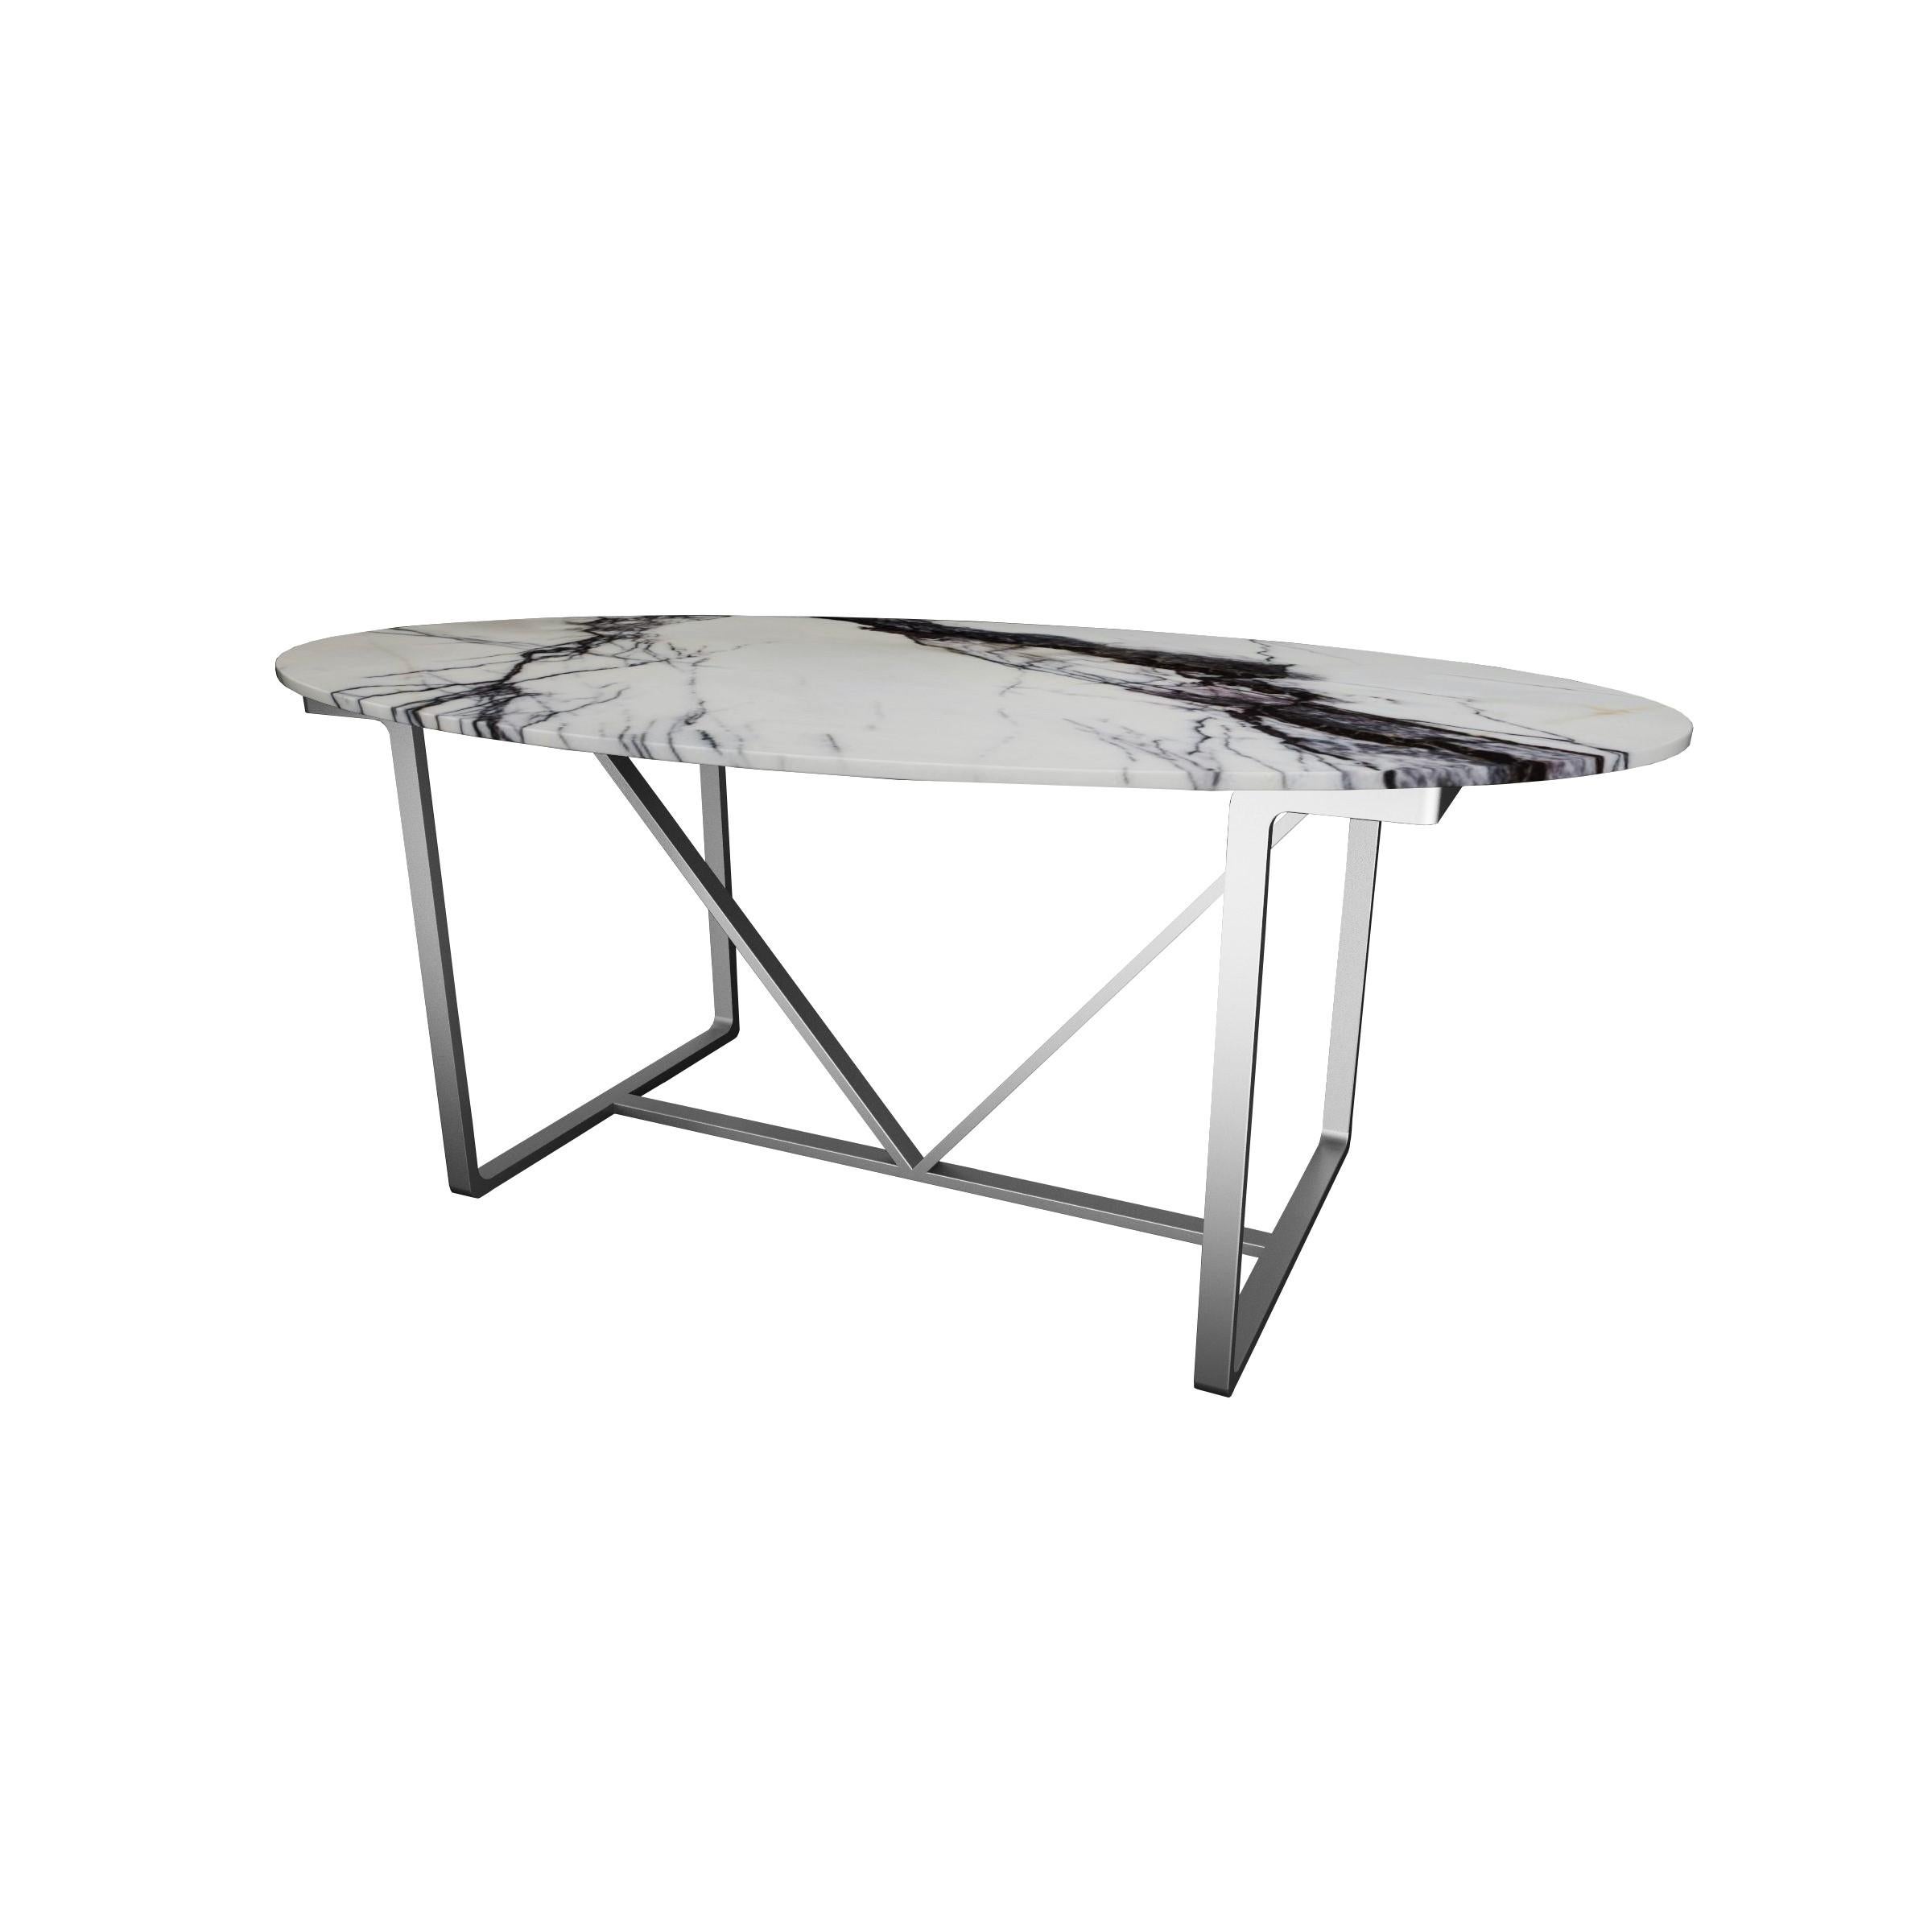 𝗣𝗿𝗼𝗱𝘂𝗰𝘁 𝗗𝗲𝘁𝗮𝗶𝗹𝘀:
Skilled work in the creation of this collection characterised by the bending technic of the frame instead of the regular welding. The marble edges have been rounded down to give a better feeling during usage, and the